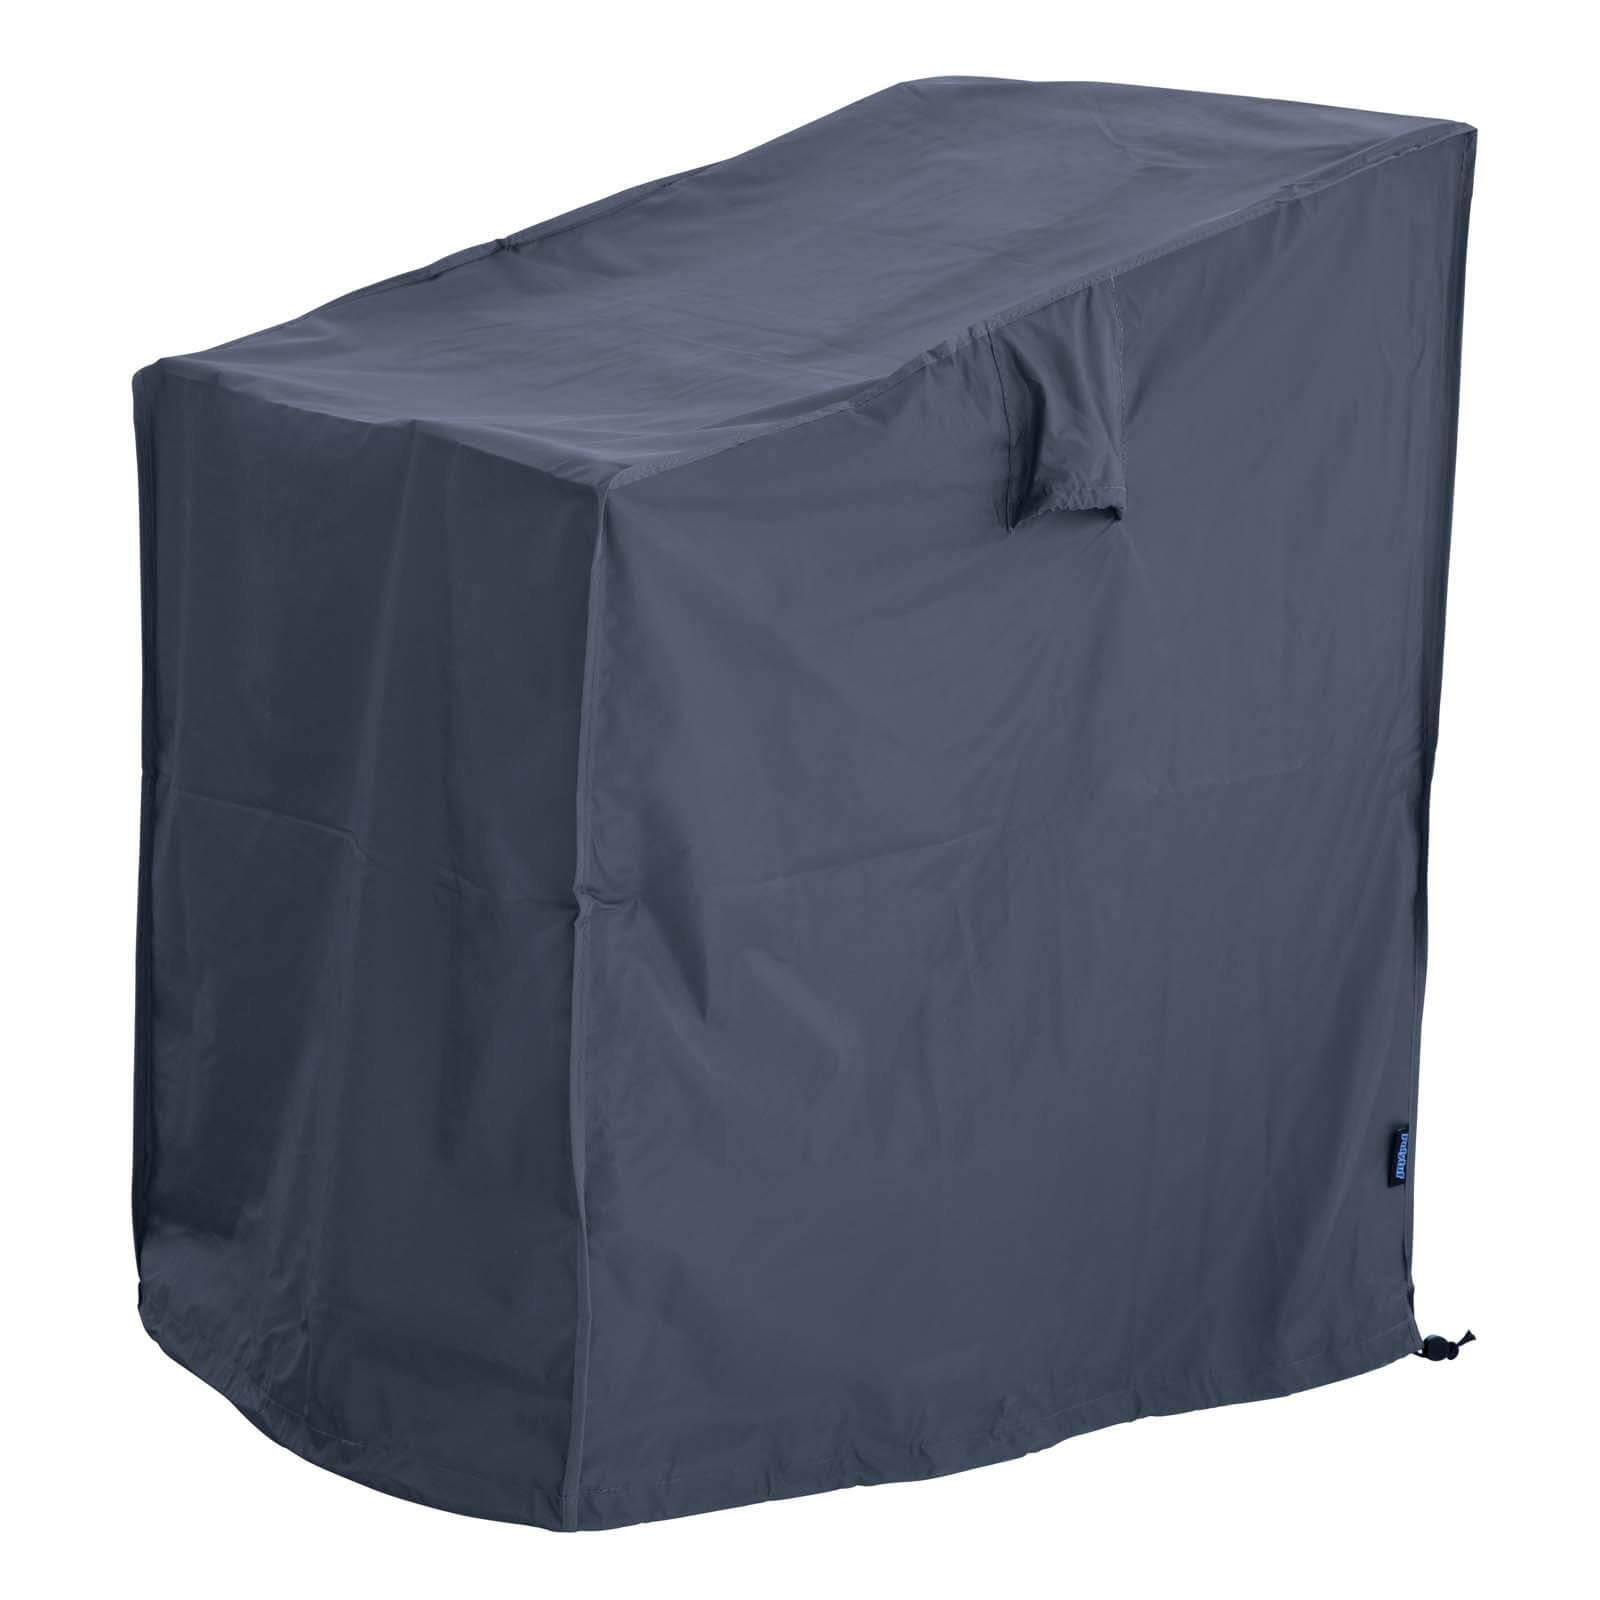 Polytuf Garden Furniture Cover - Up to 6 Stacking Chairs